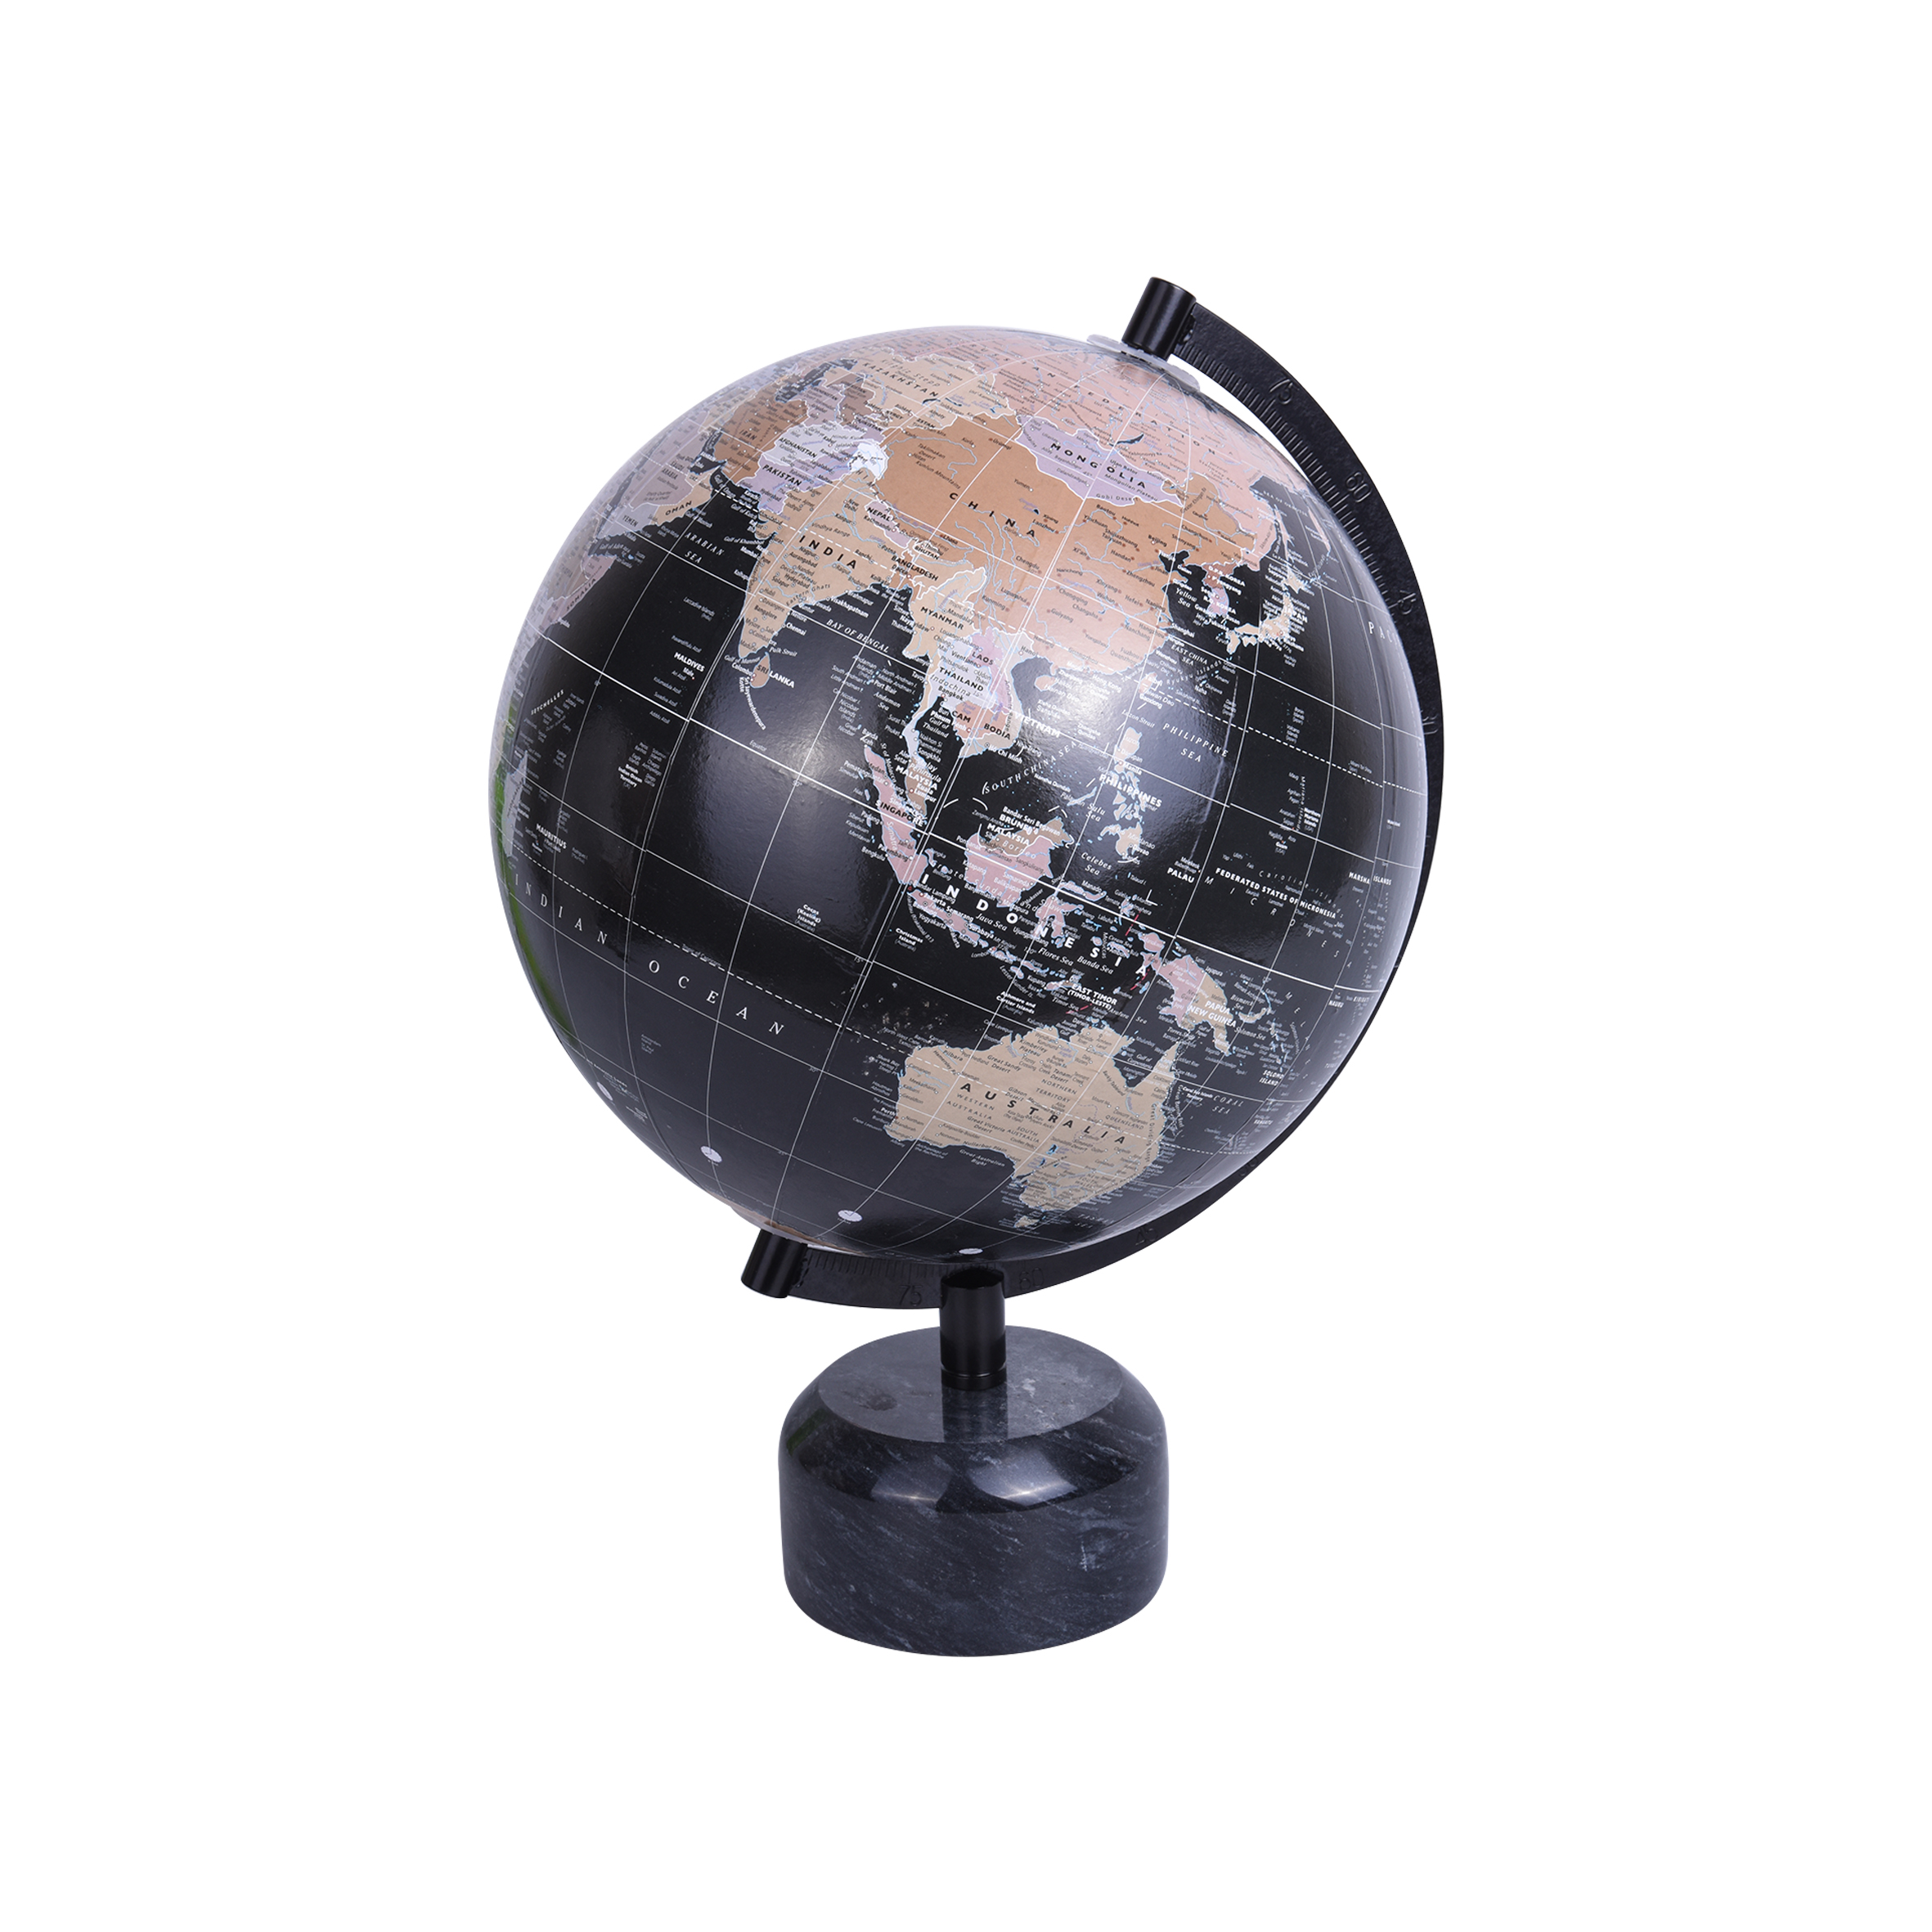 custom globes and hourglass supplies school office room decor decorative accessories